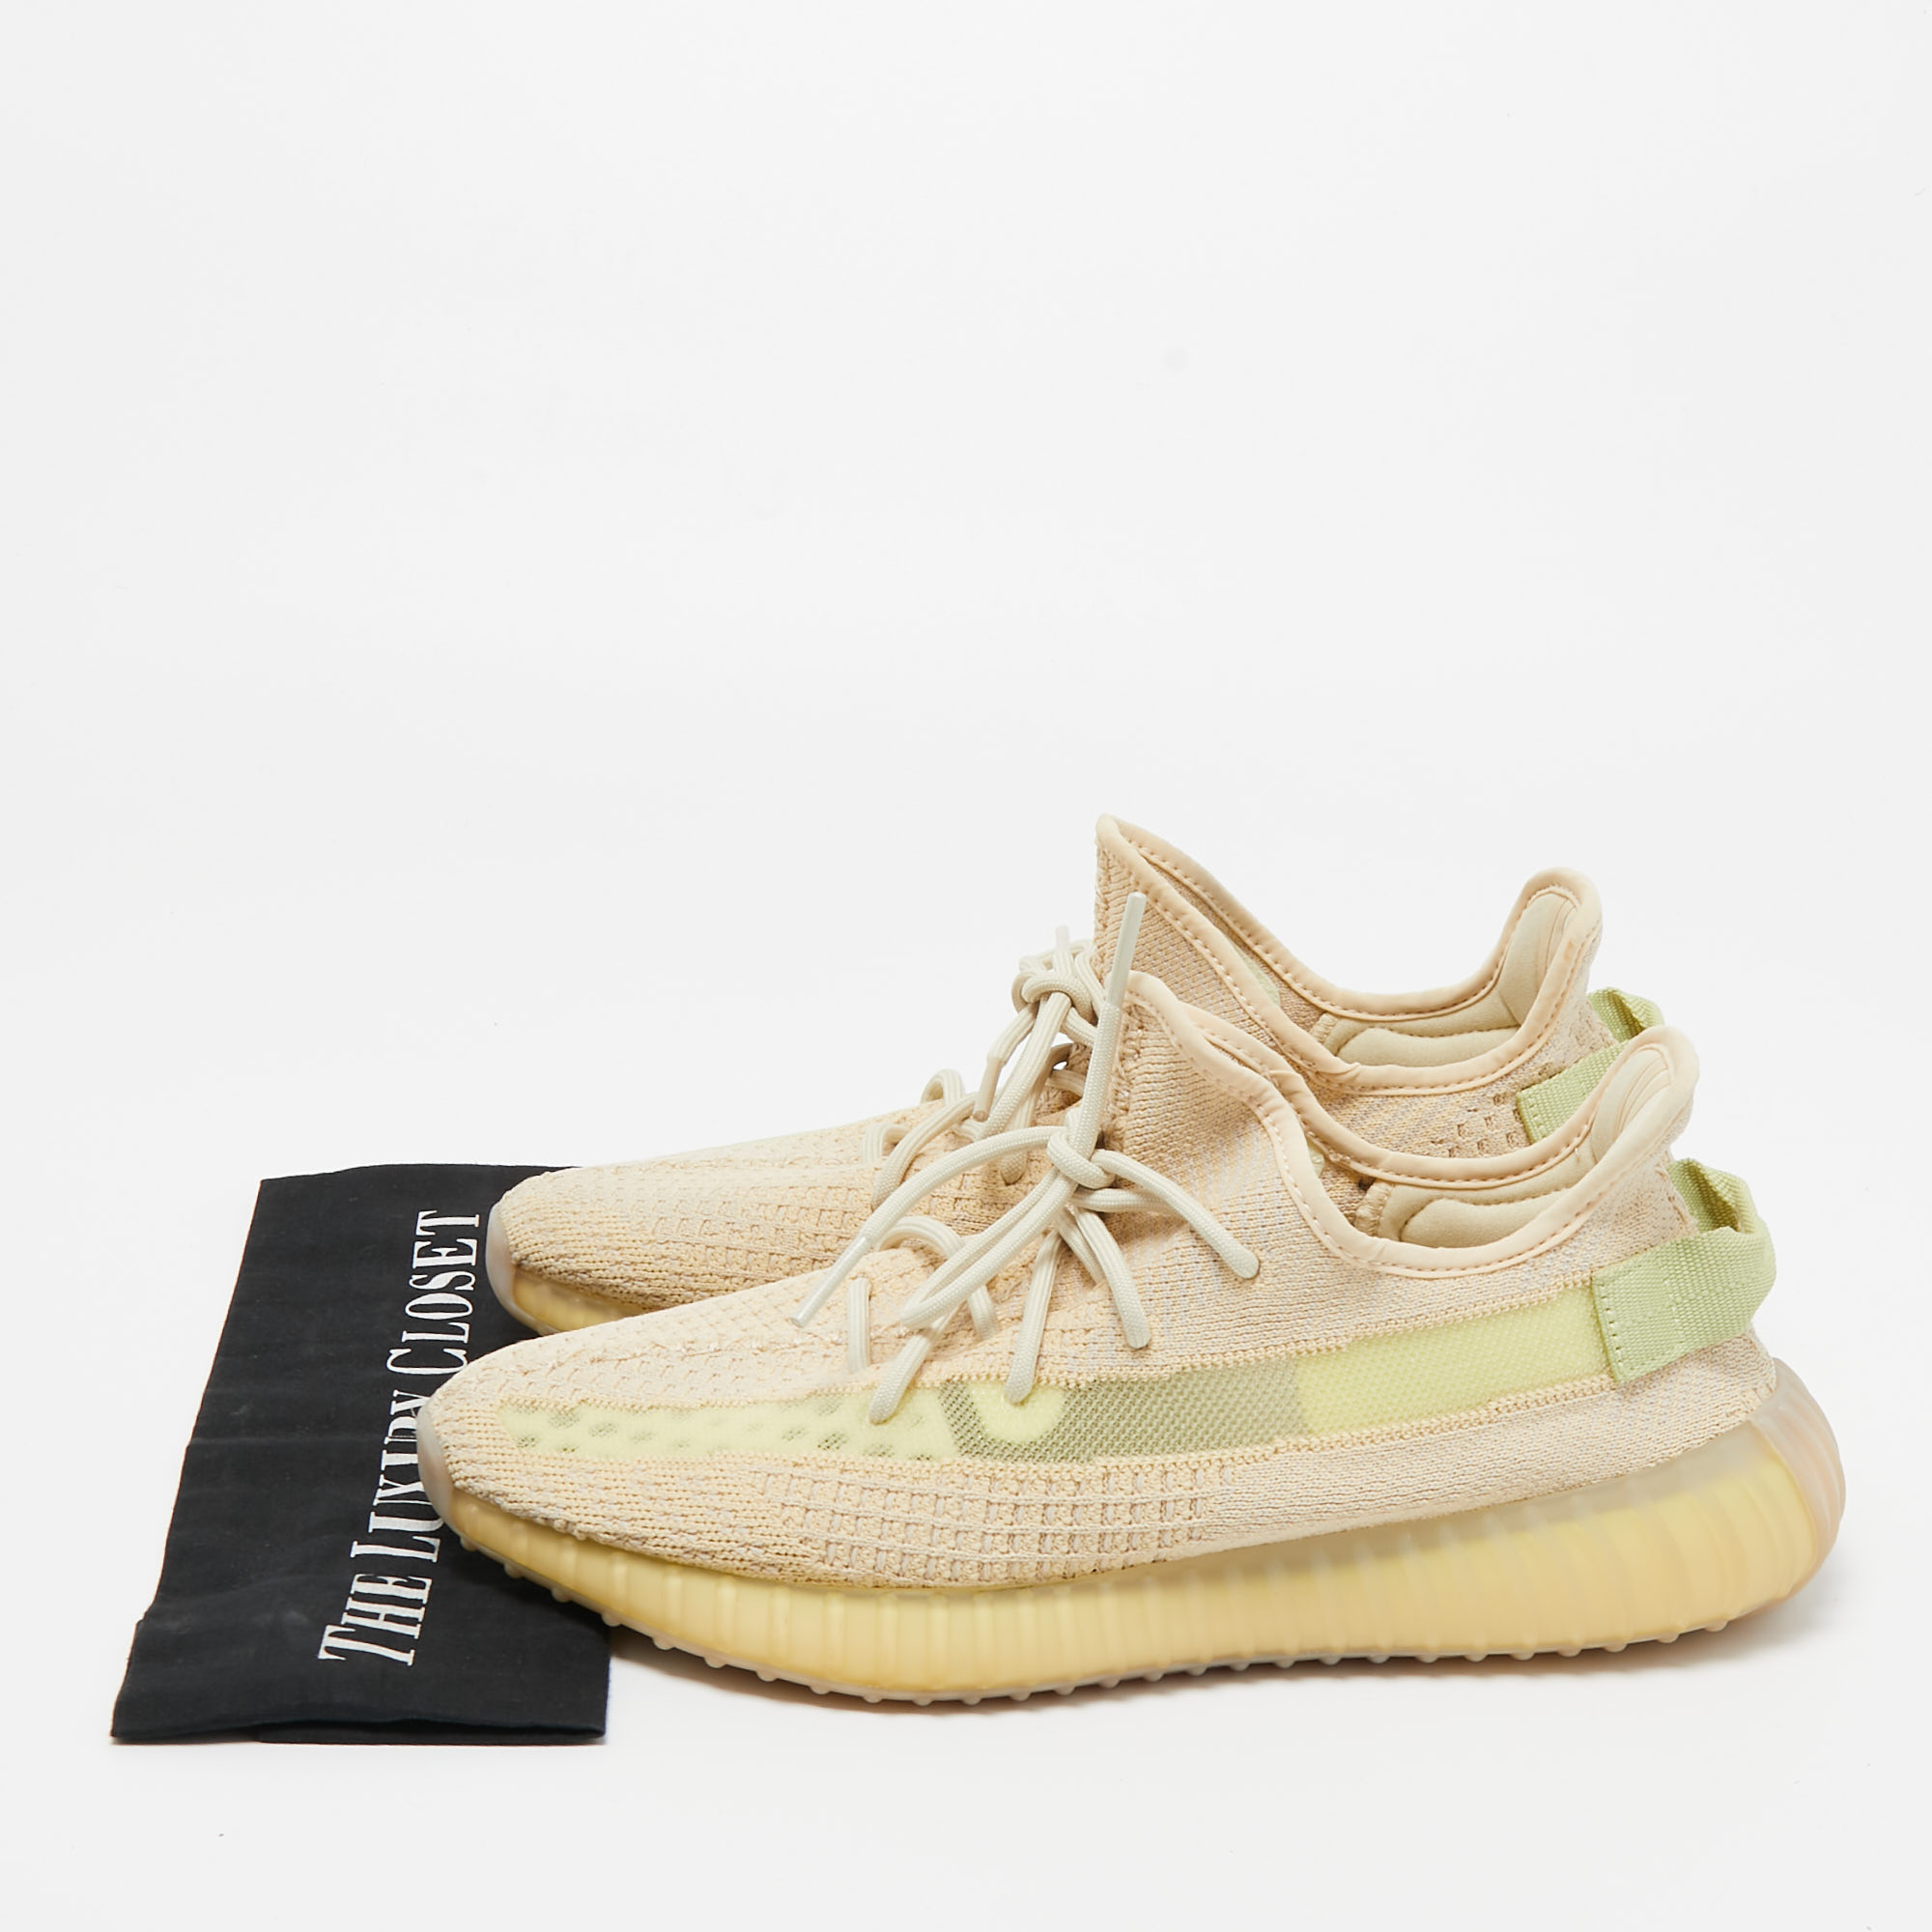 Yeezy X Adidas Cream Knit Fabric Boost 350 V2-Flax Sneakers Size 44 2/3